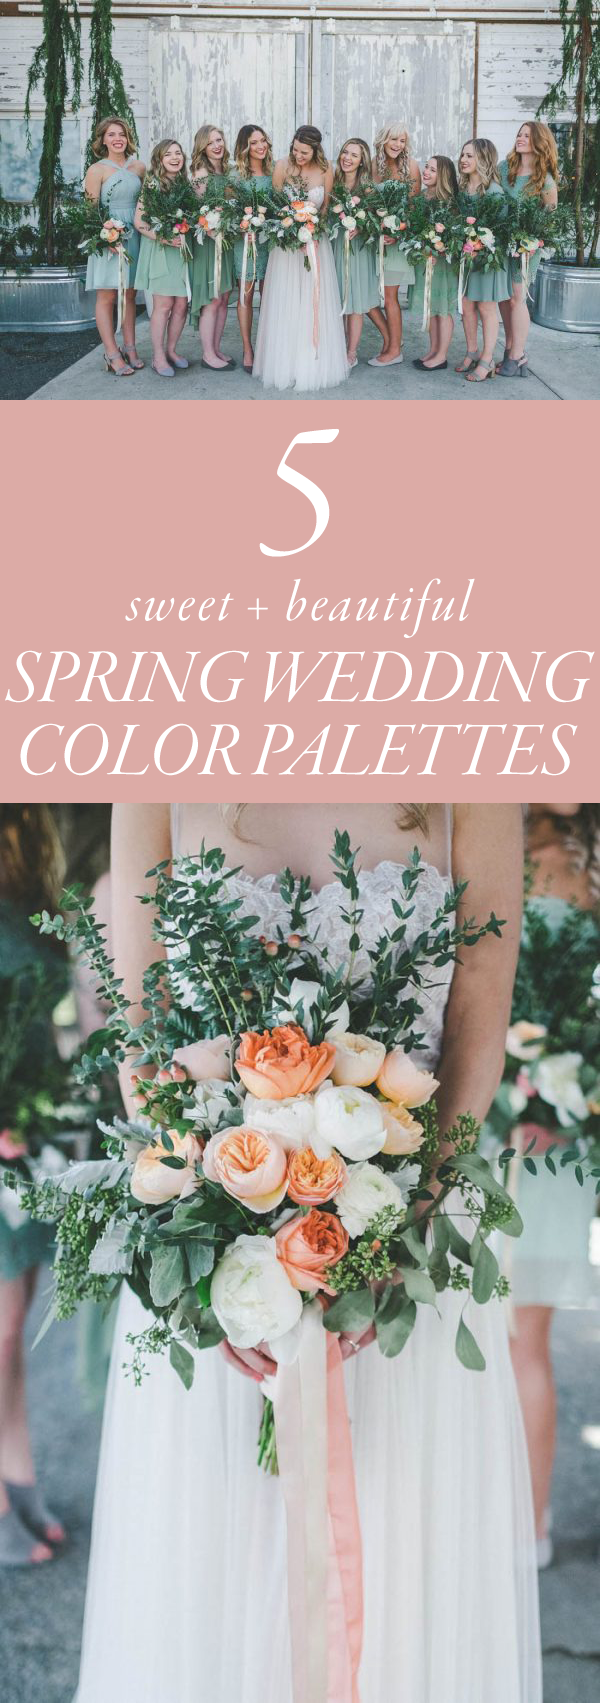 58 INFO WEDDING COLOR IDEAS FOR JUNE DIY IDEAS WITH VIDEO TUTORIAL